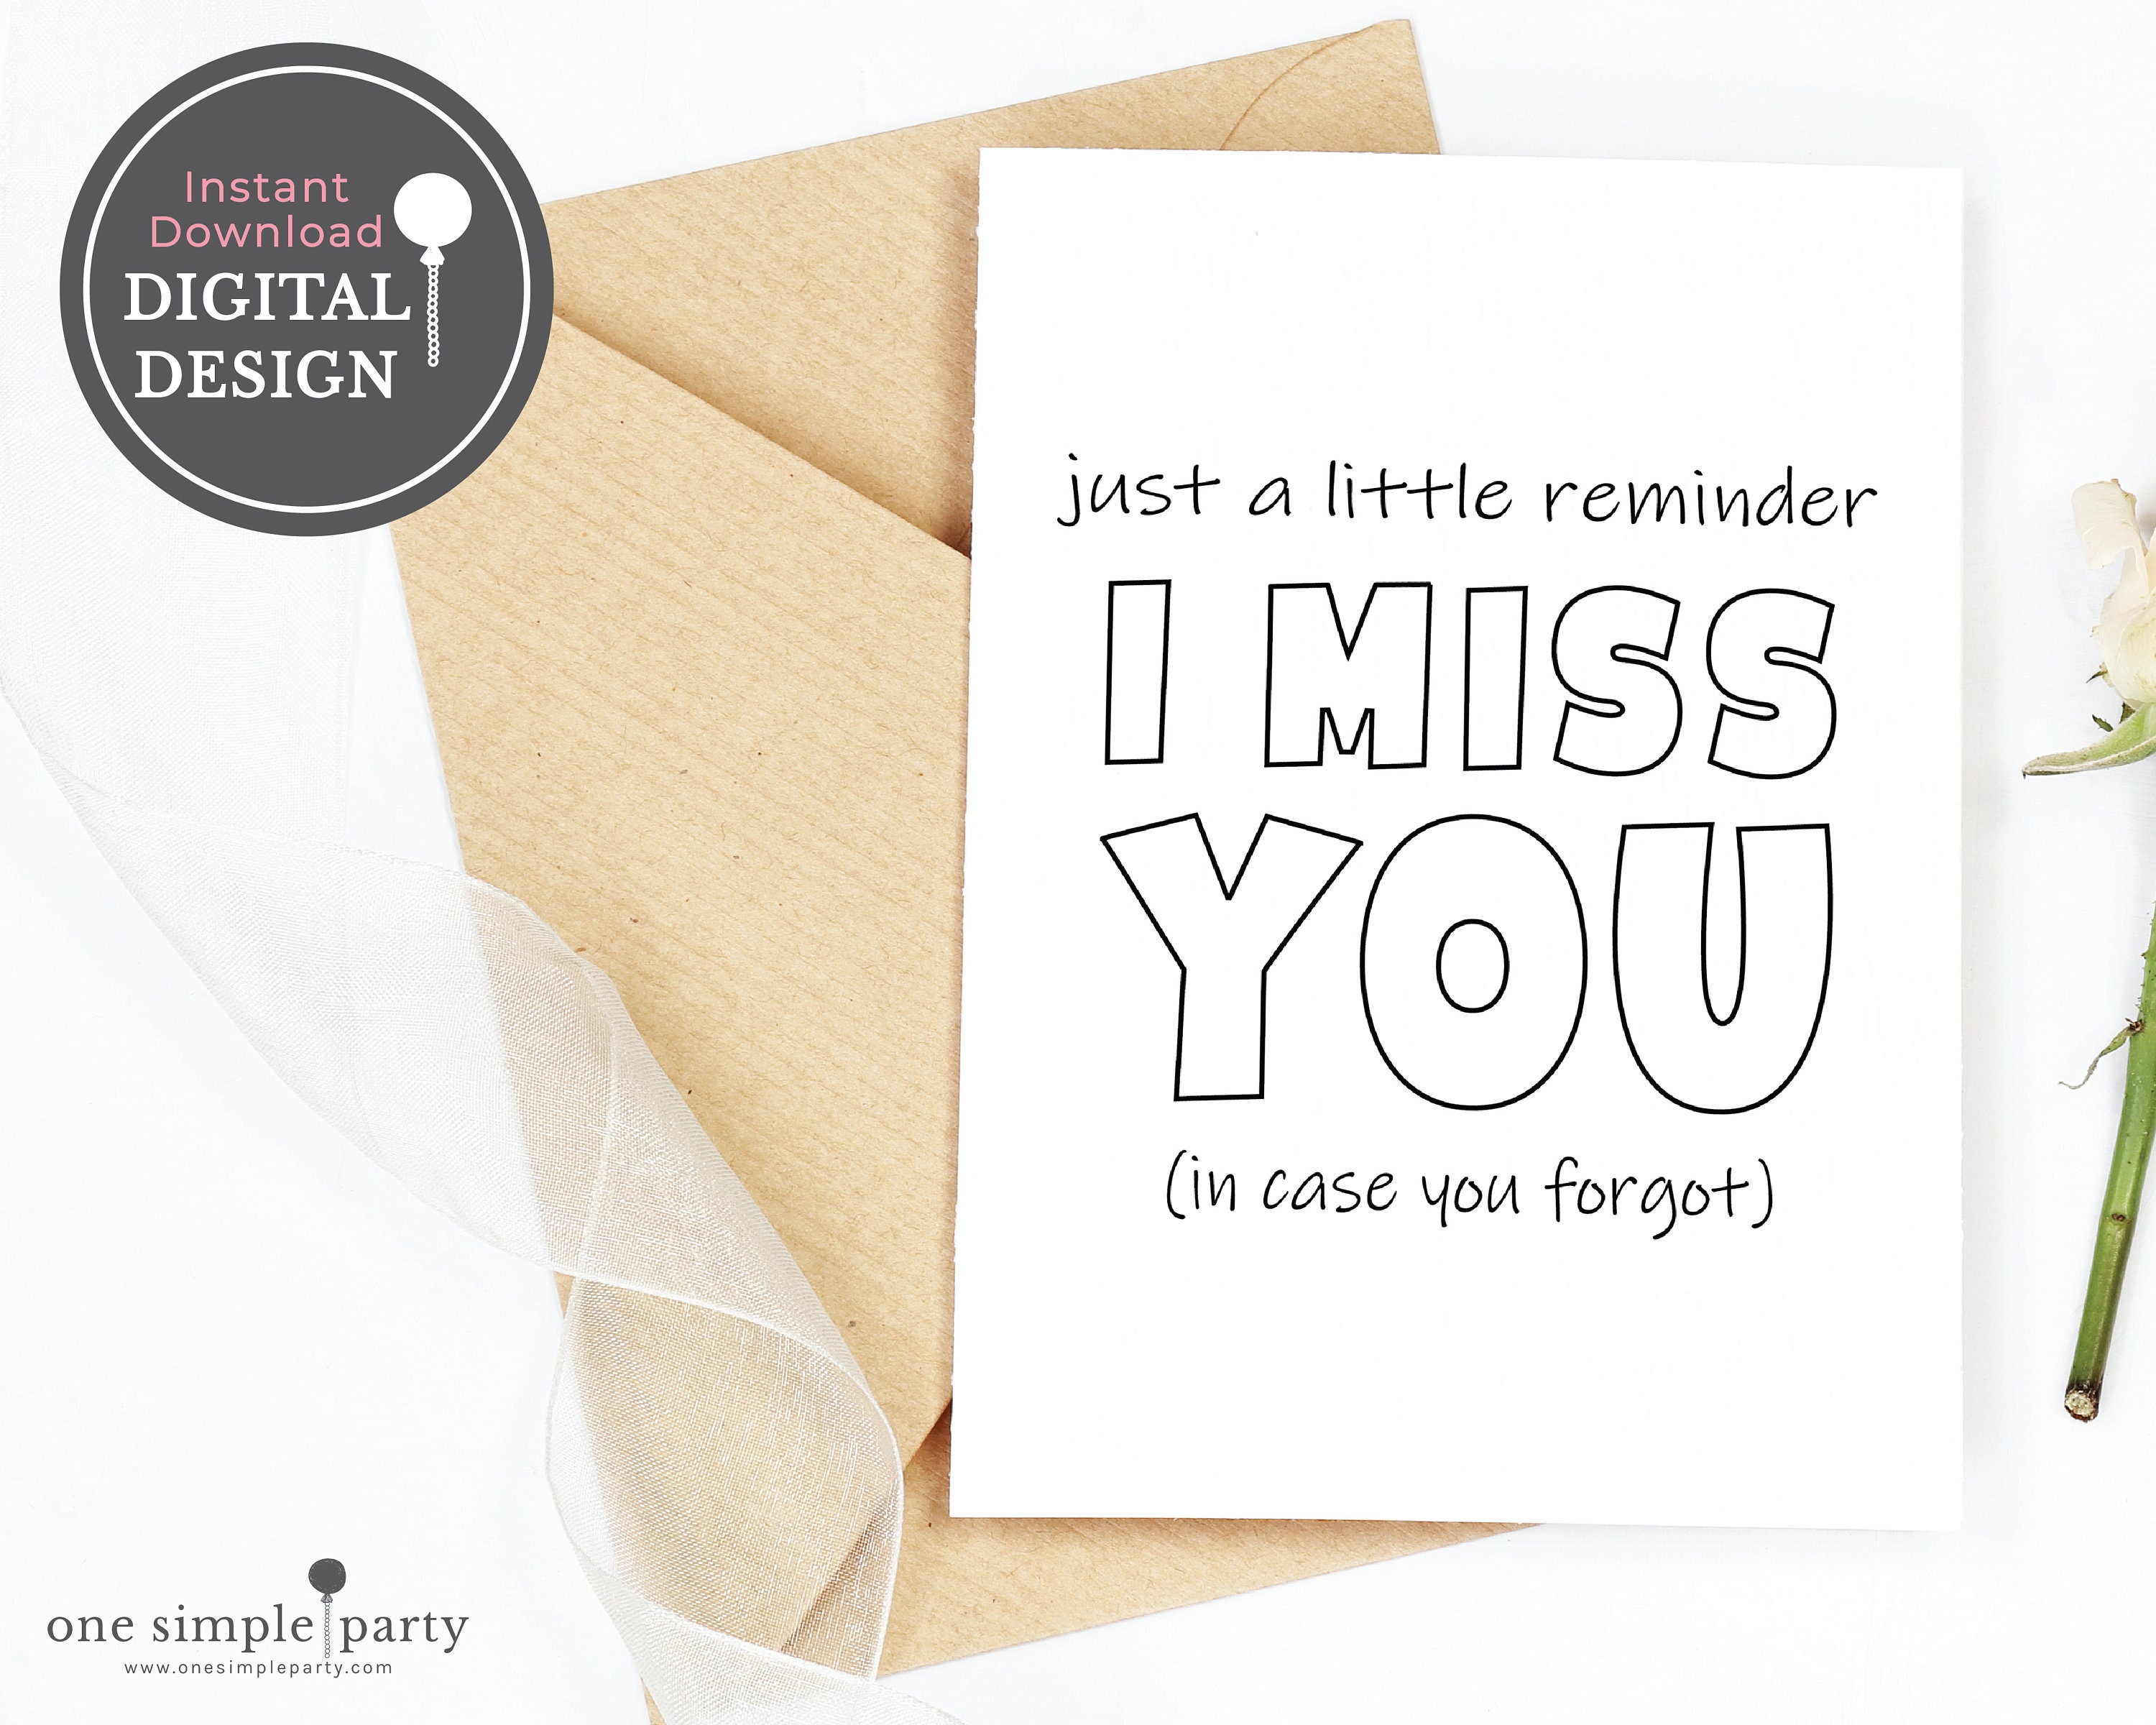 Instant download kids i miss you coloring card thinking of you friendship kids miss you card send hug printable coloring cards